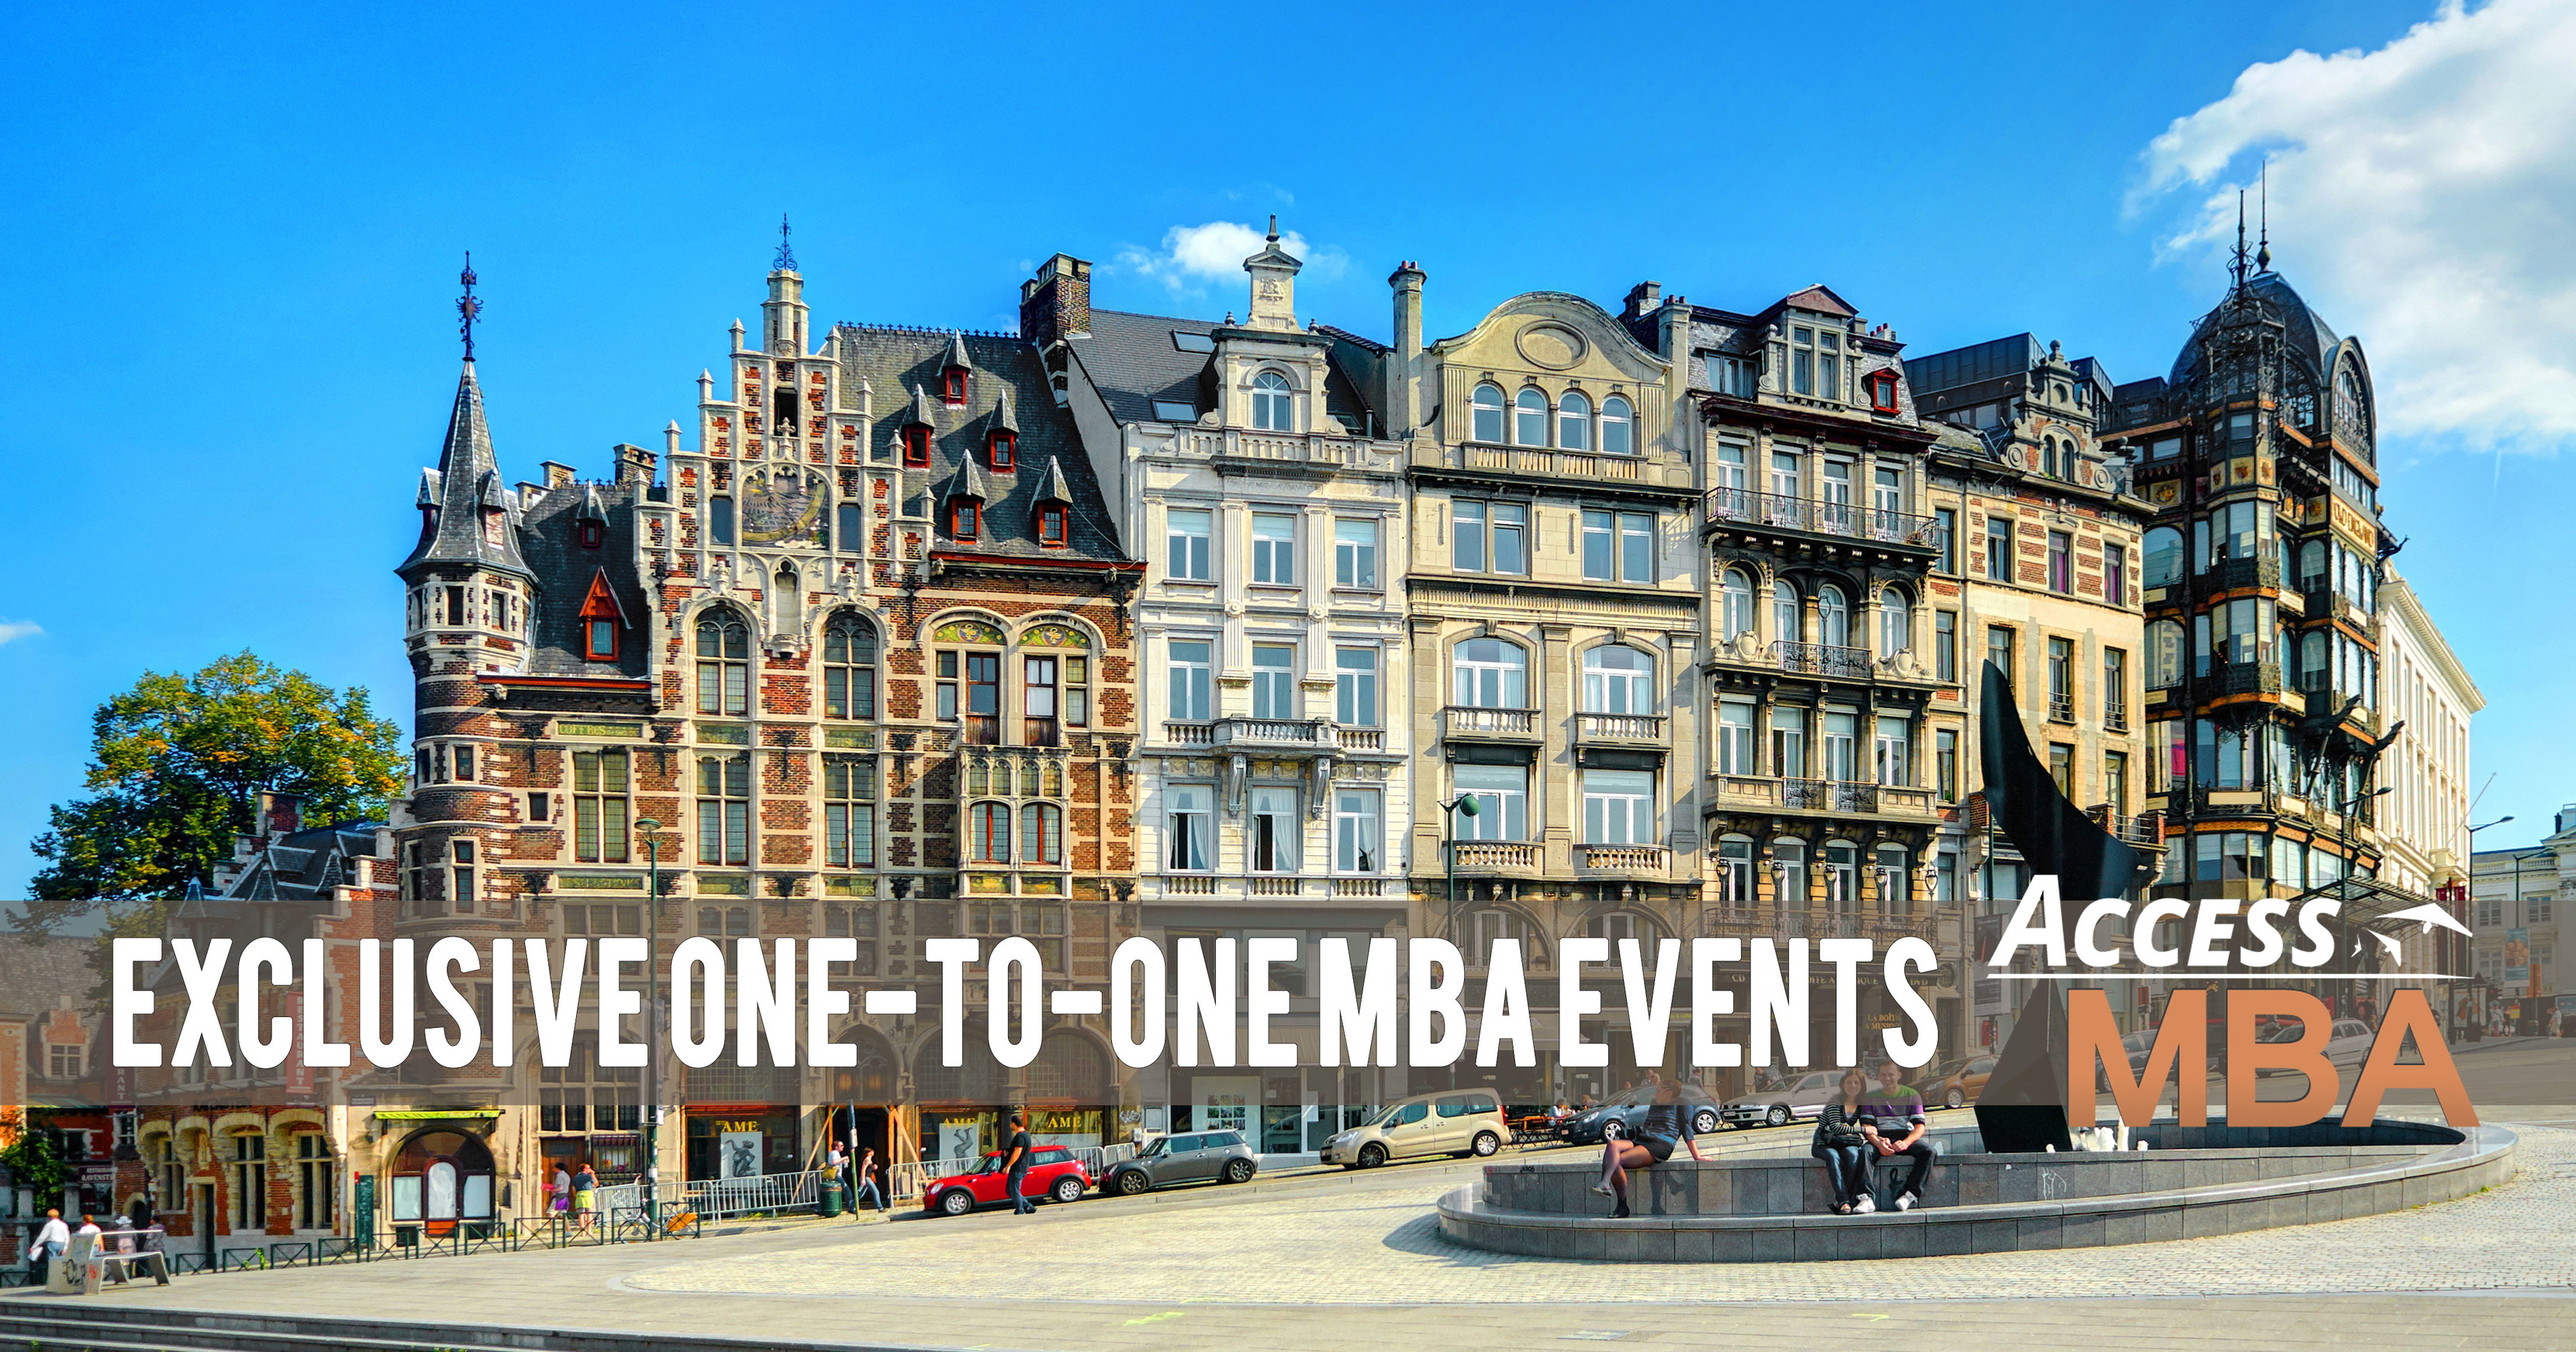 Top International One-to-One MBA Event in Brussels, Brussels, Bruxelles-Capitale, Belgium